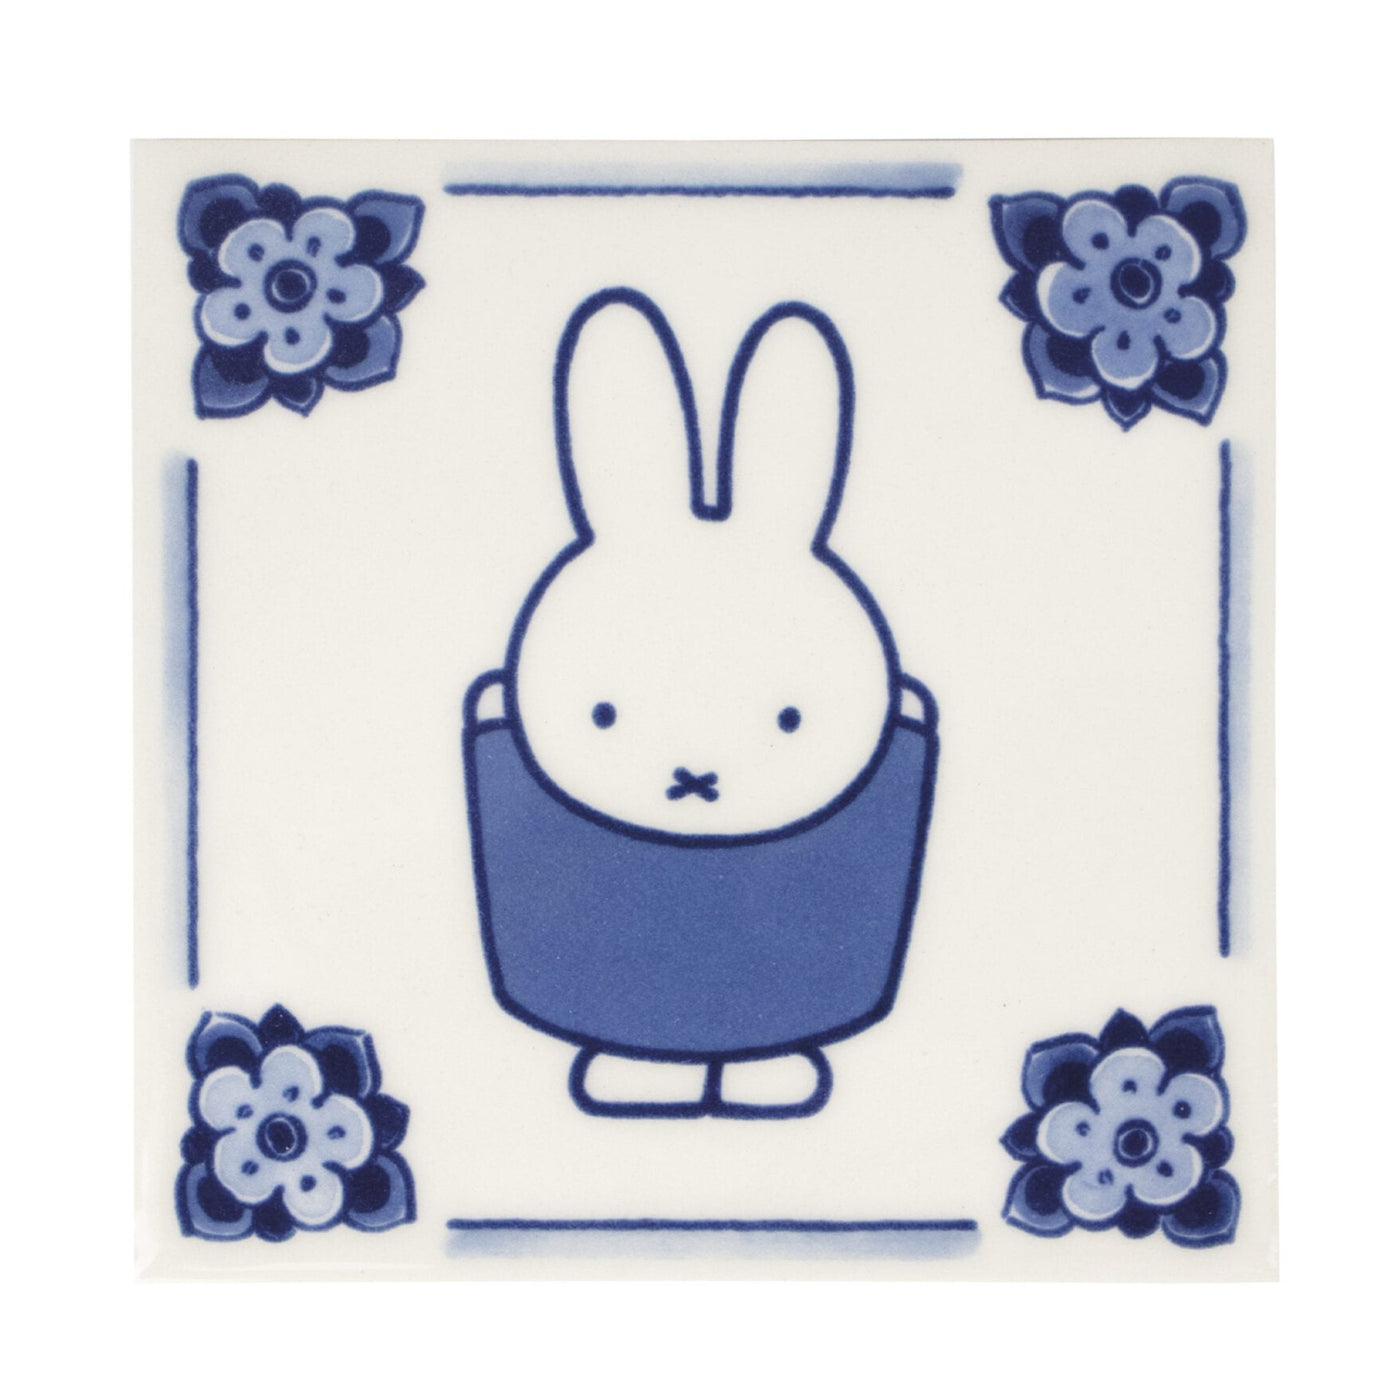 Tile Miffy Cheering Delft Blue by Royal Delft